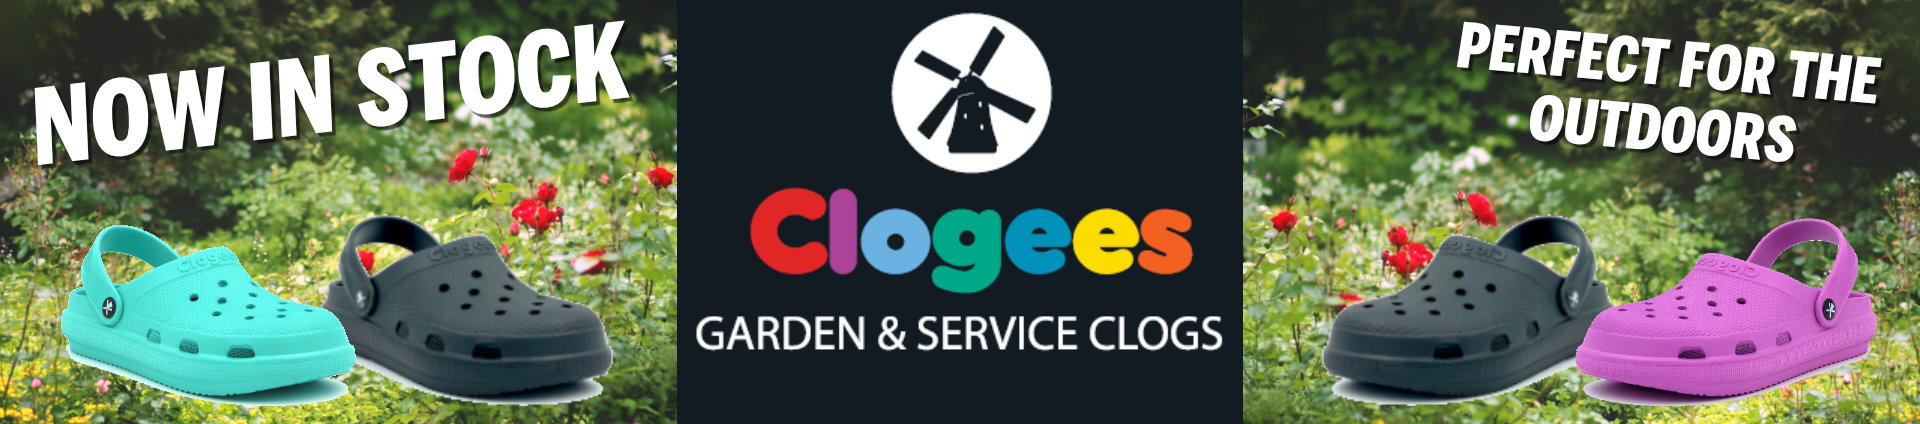 Clogees now in stock